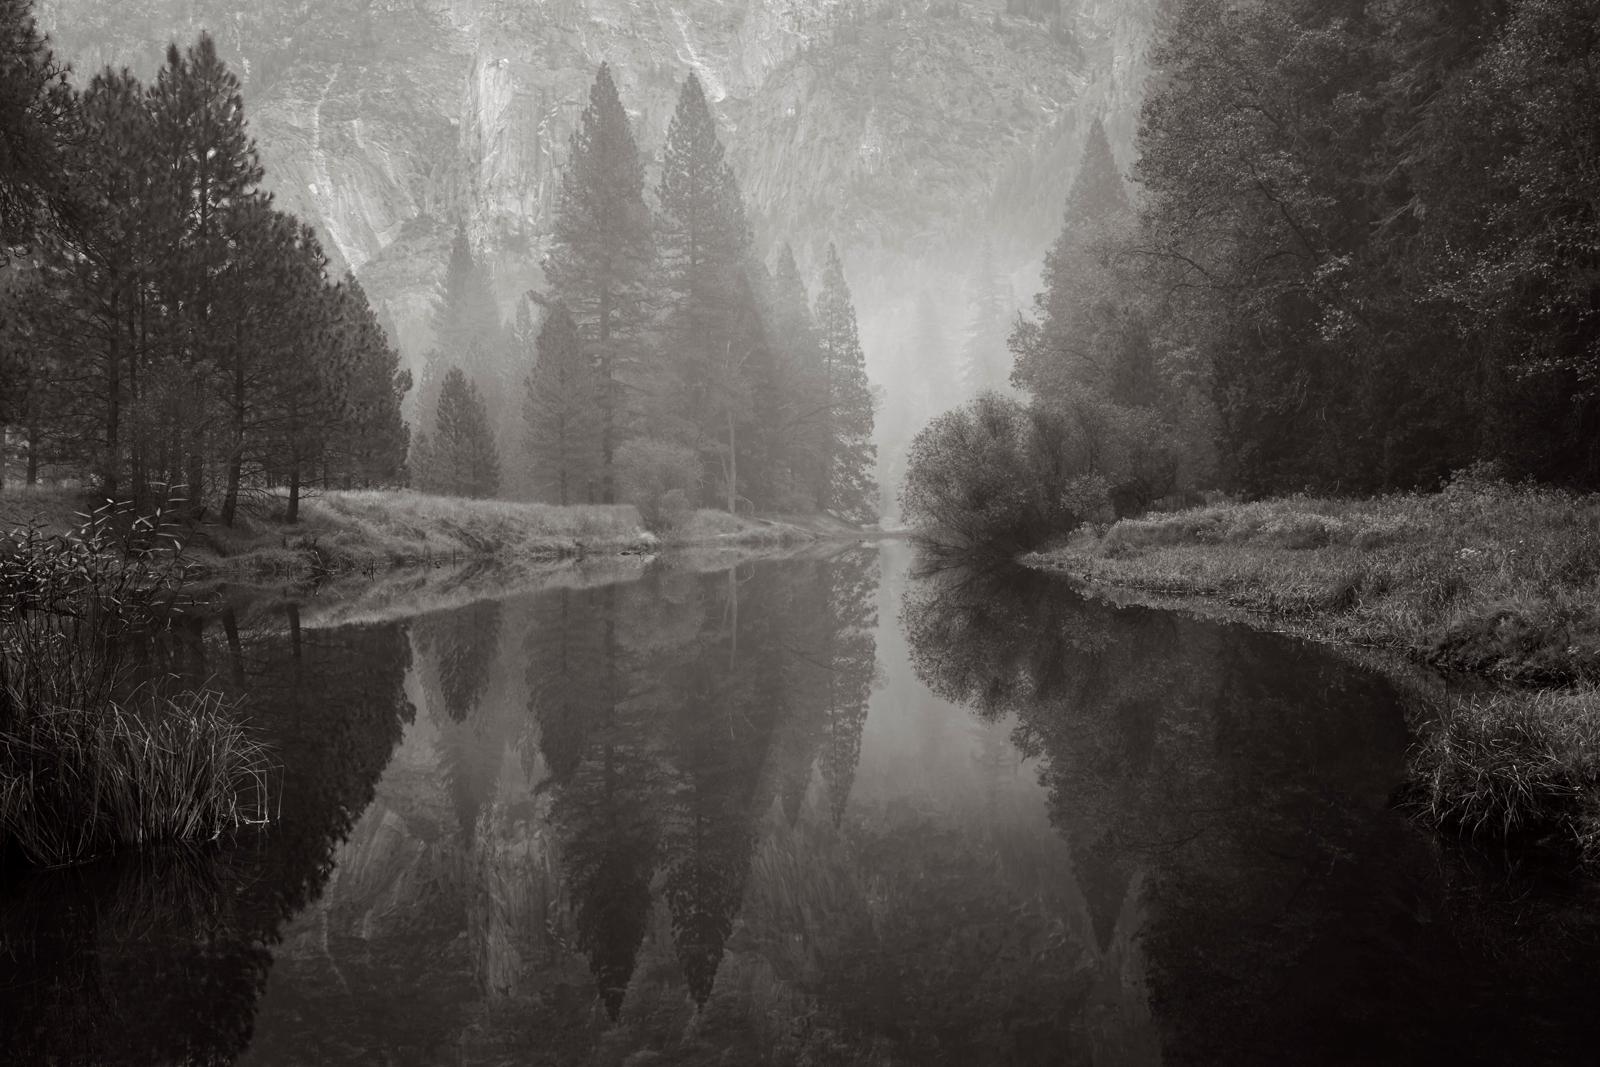 Drew Doggett Black and White Photograph - Portrait of a Calm Morning in Yosemite with a Clear Reflection on the Water